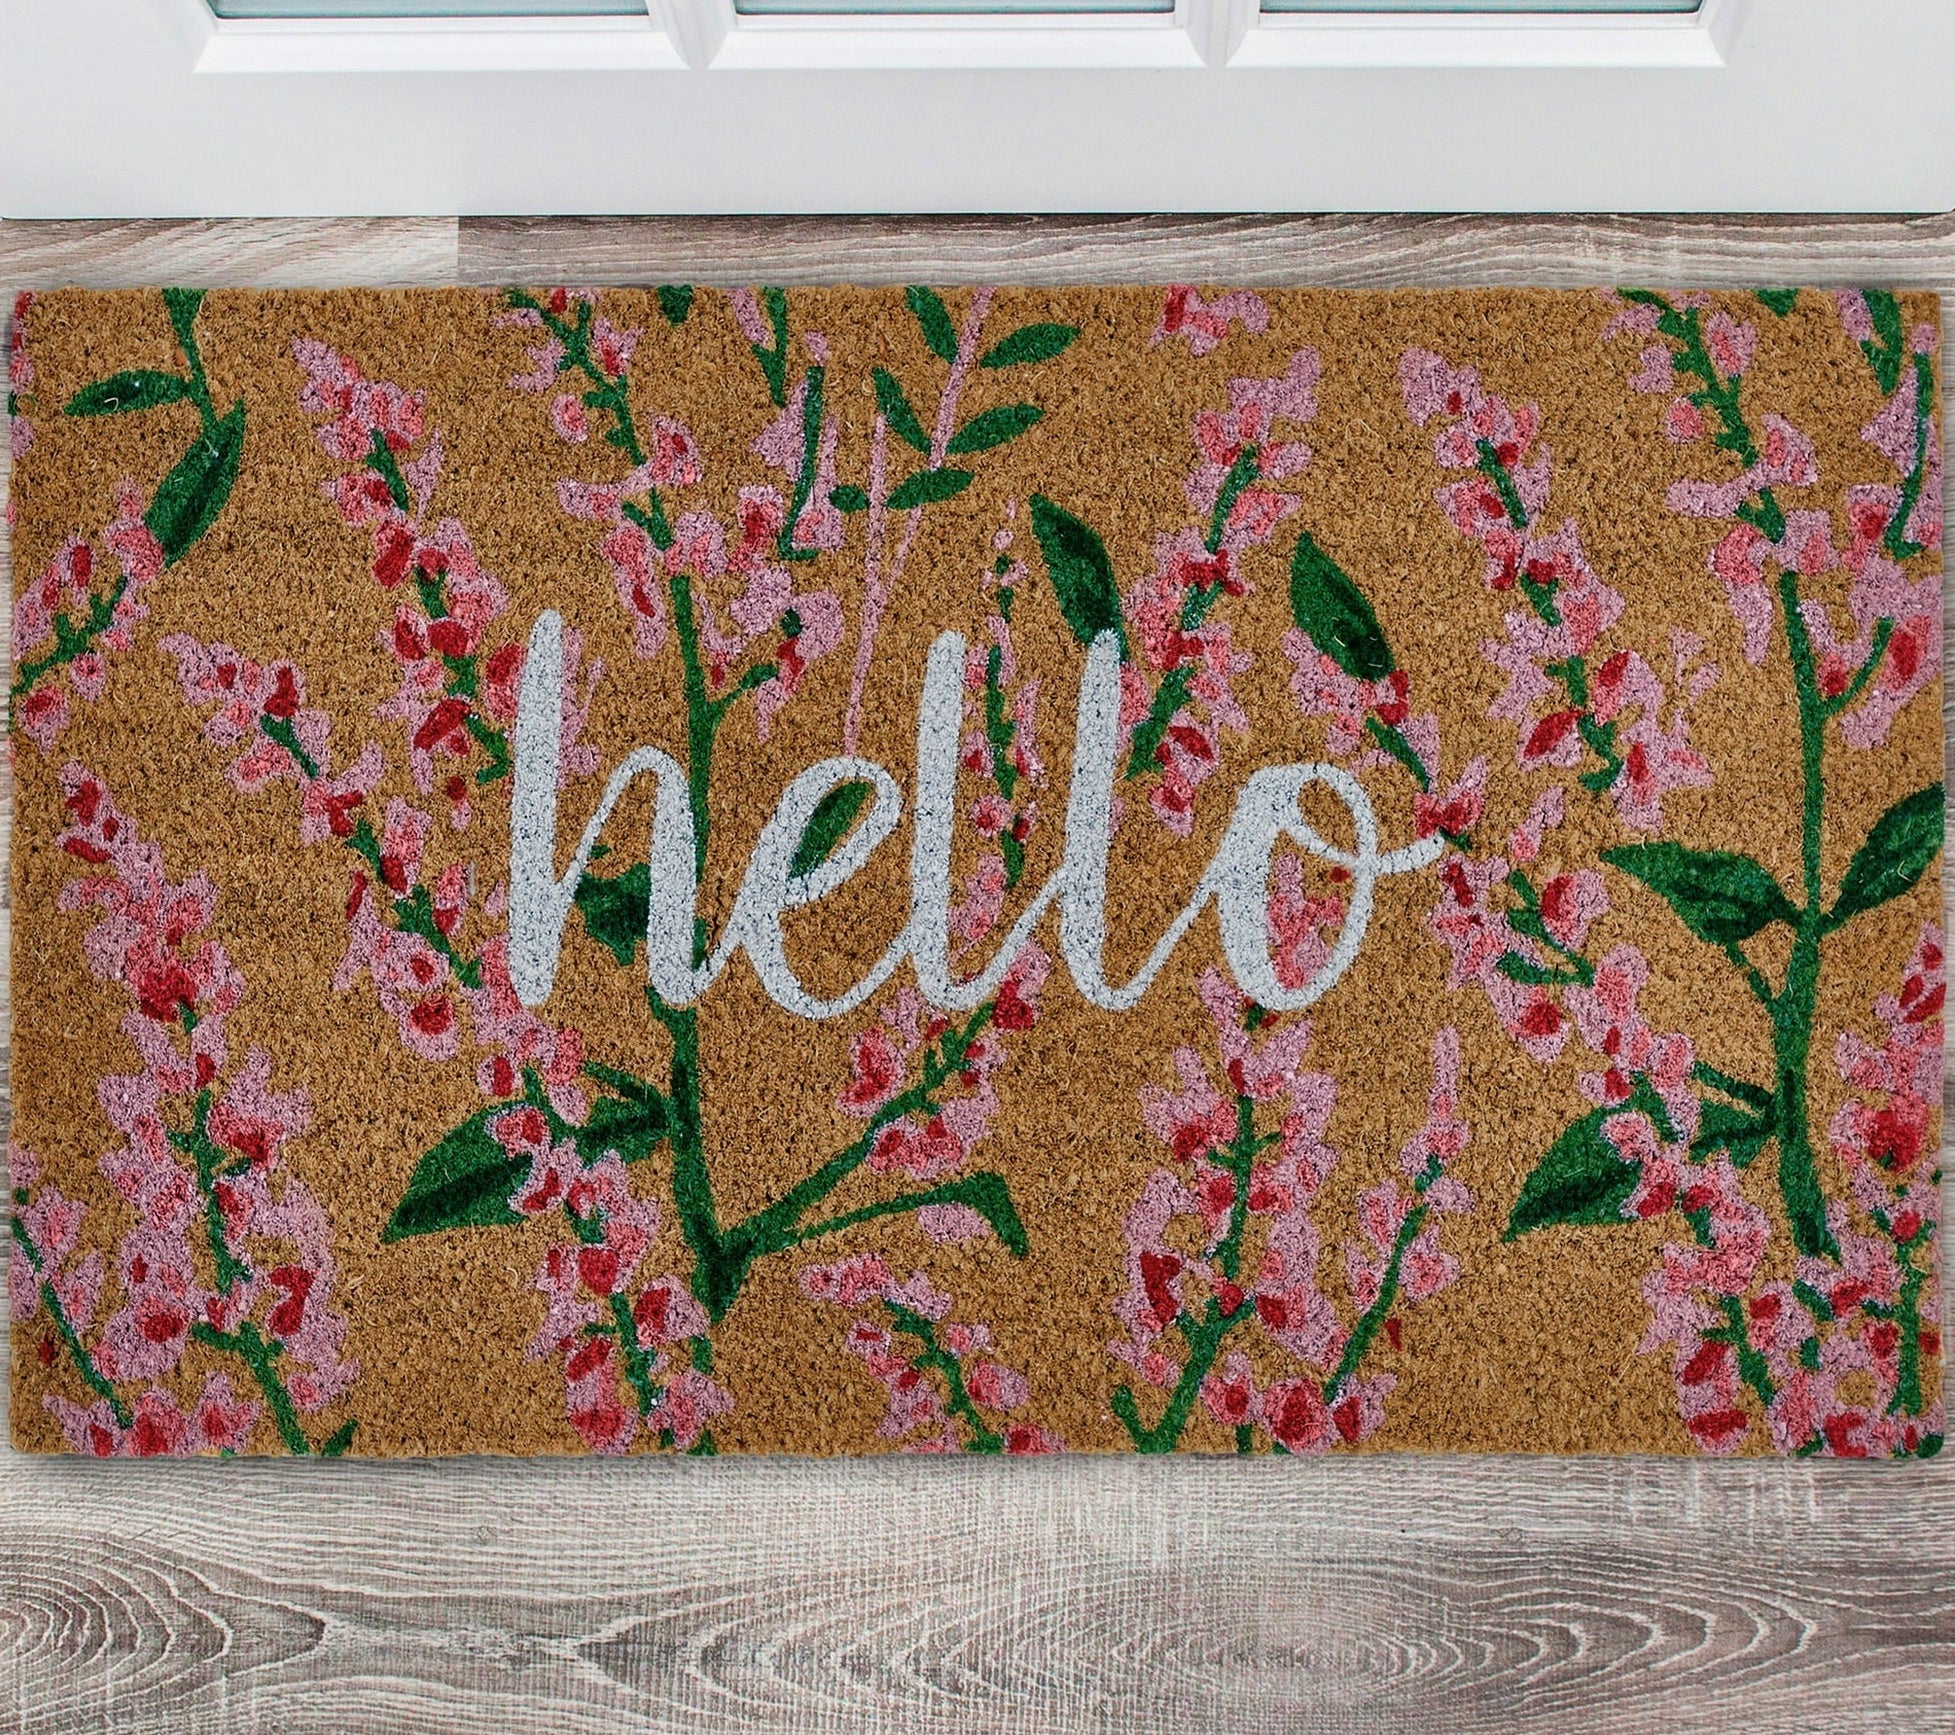 the mat with the word &quot;hello&quot; written on it and pink and green flowers